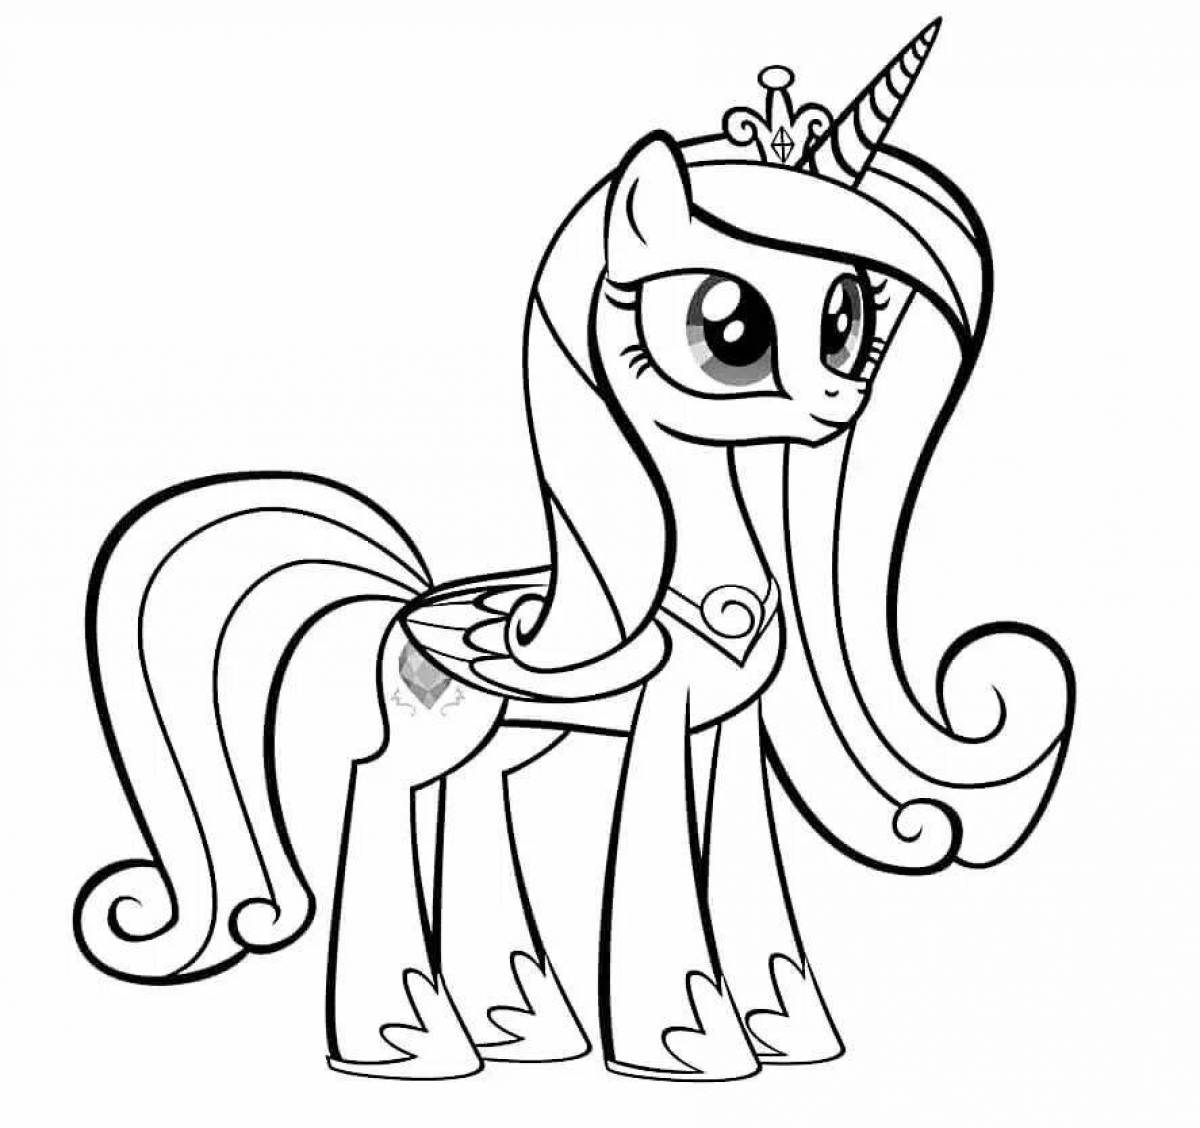 Coloring page brave baby pony